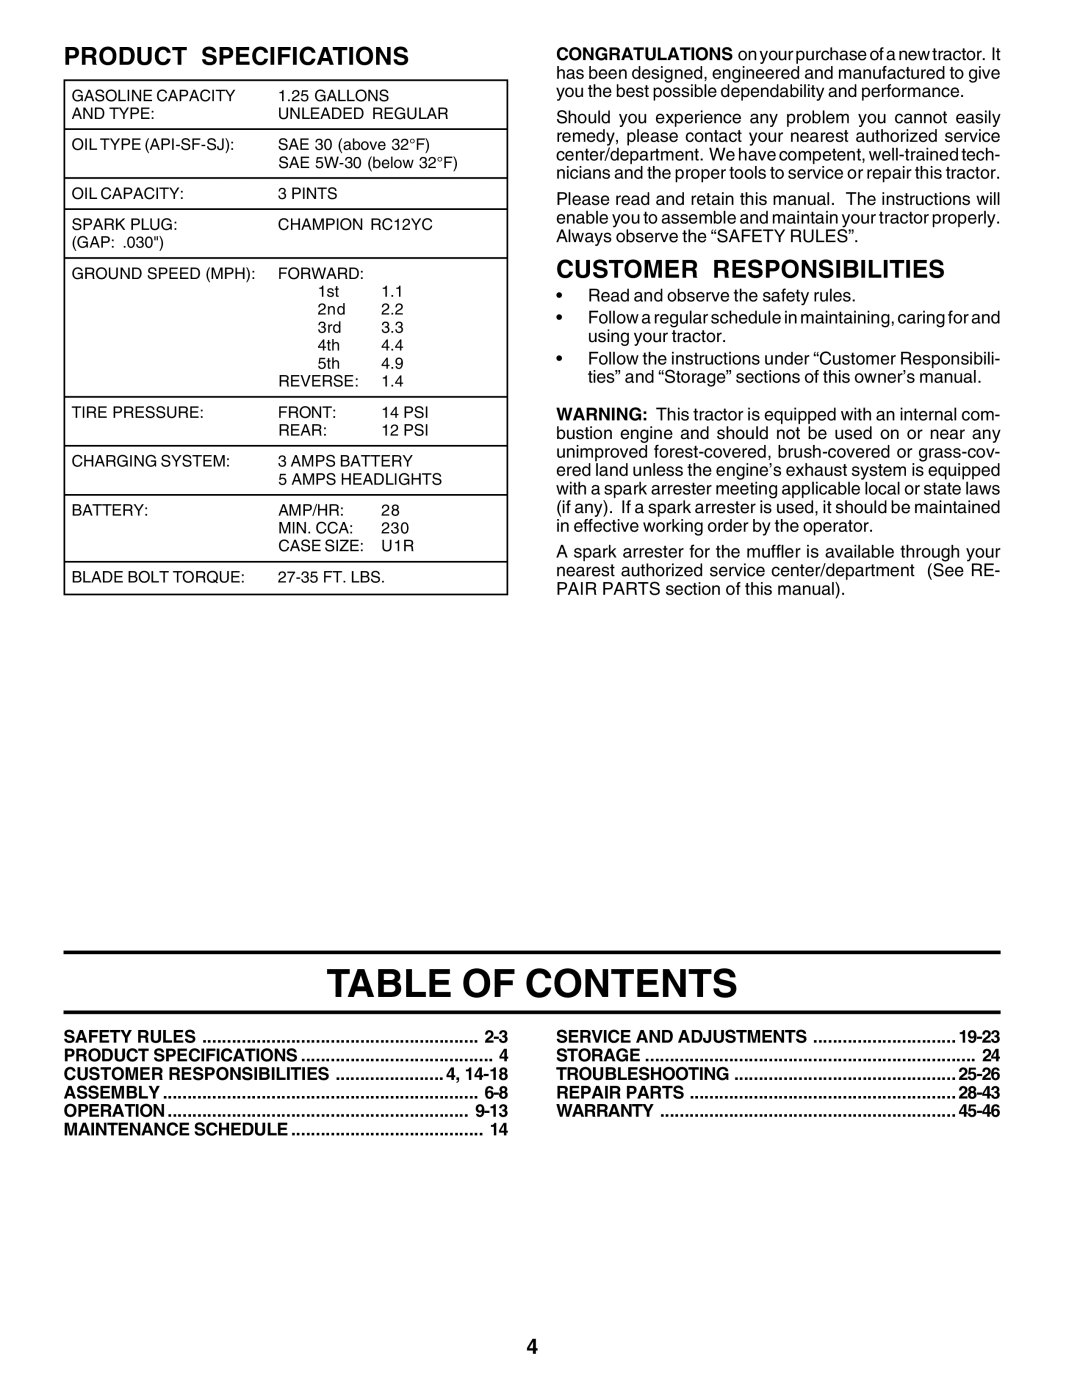 Poulan 182946 manual Table Of Contents, Product Specifications, Customer Responsibilities 